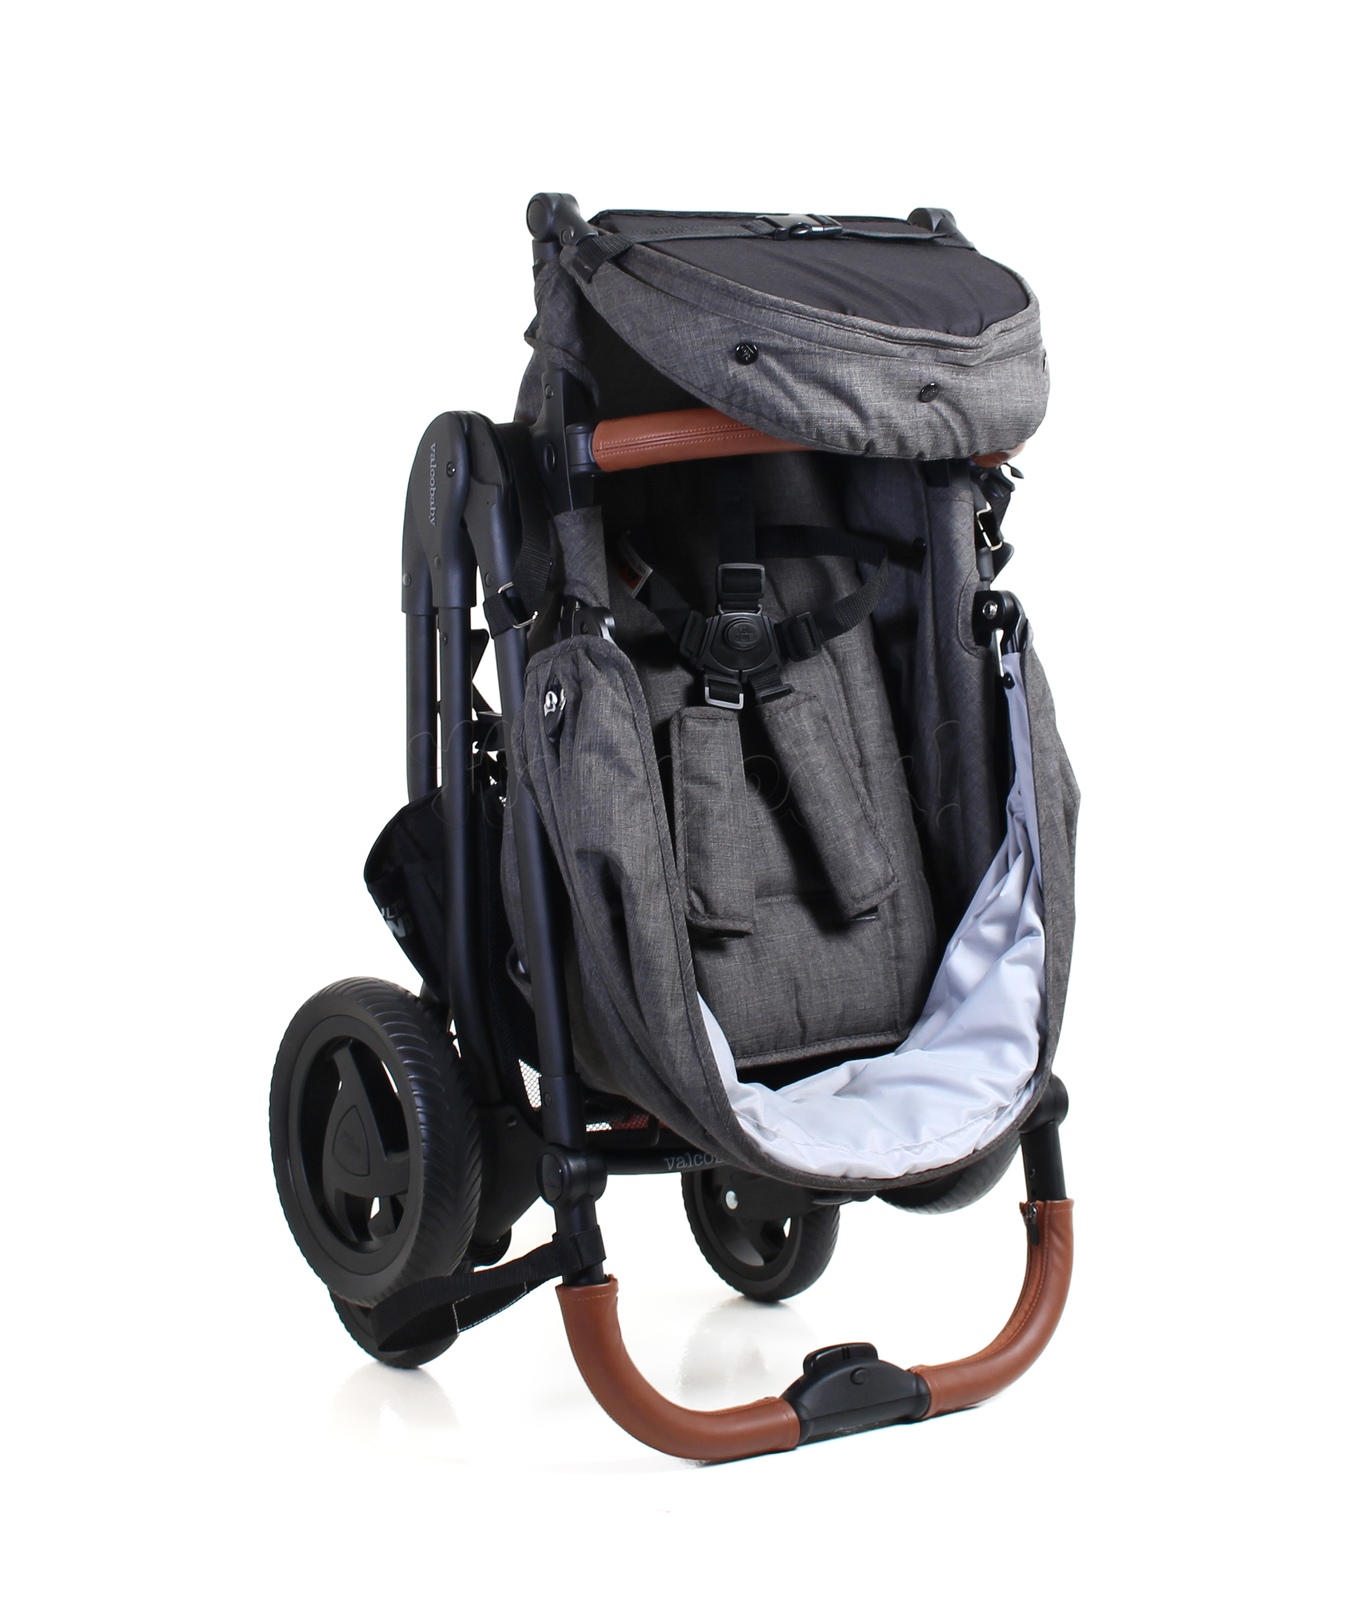 Коляска VALCO BABY SNAP 4 ULTRA TREND CHARCOAL